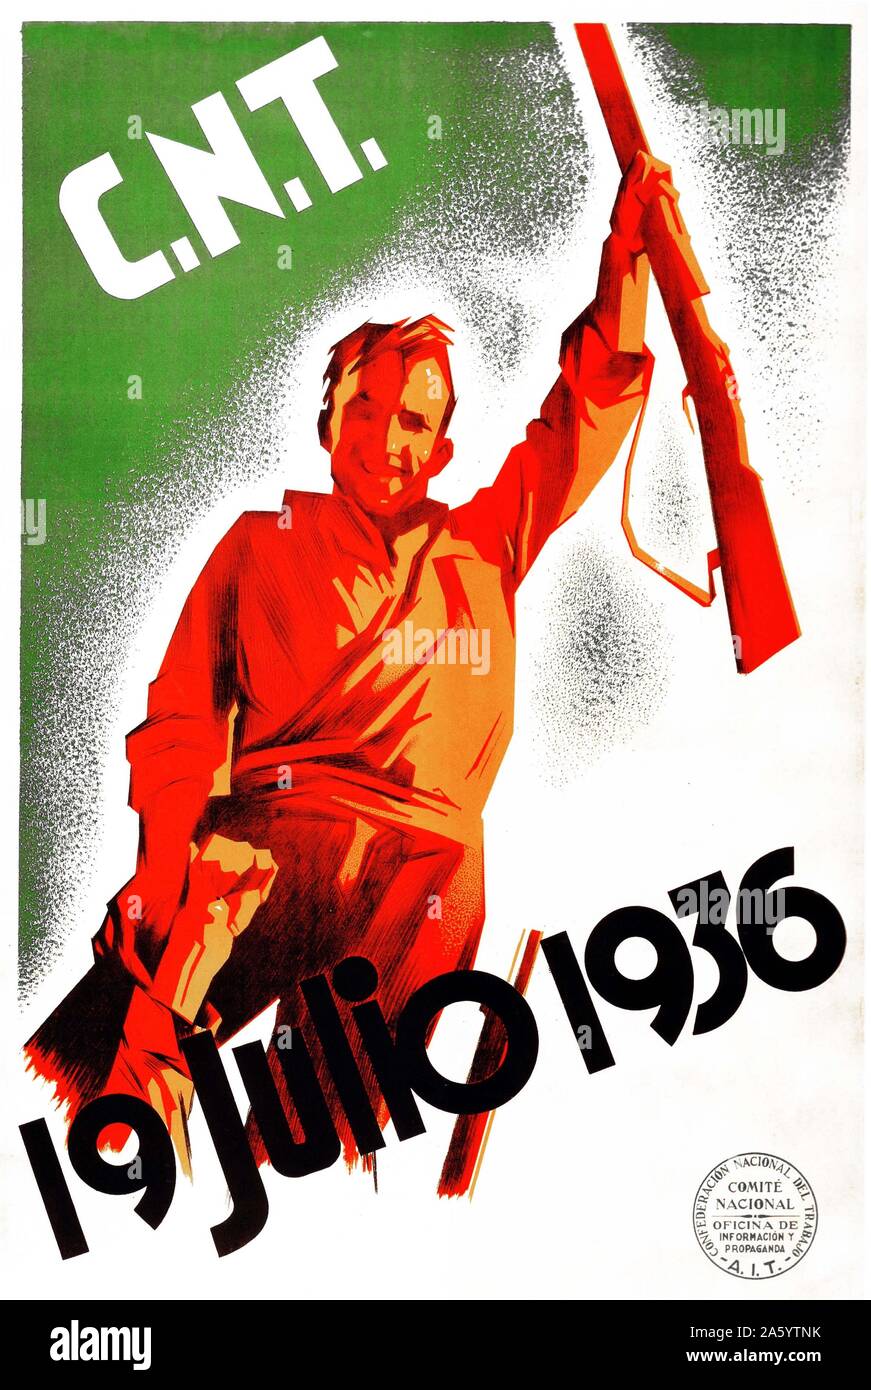 anarchist movement, C.N.T. poster commemorates the day on which the Spanish Civil War began. Stock Photo